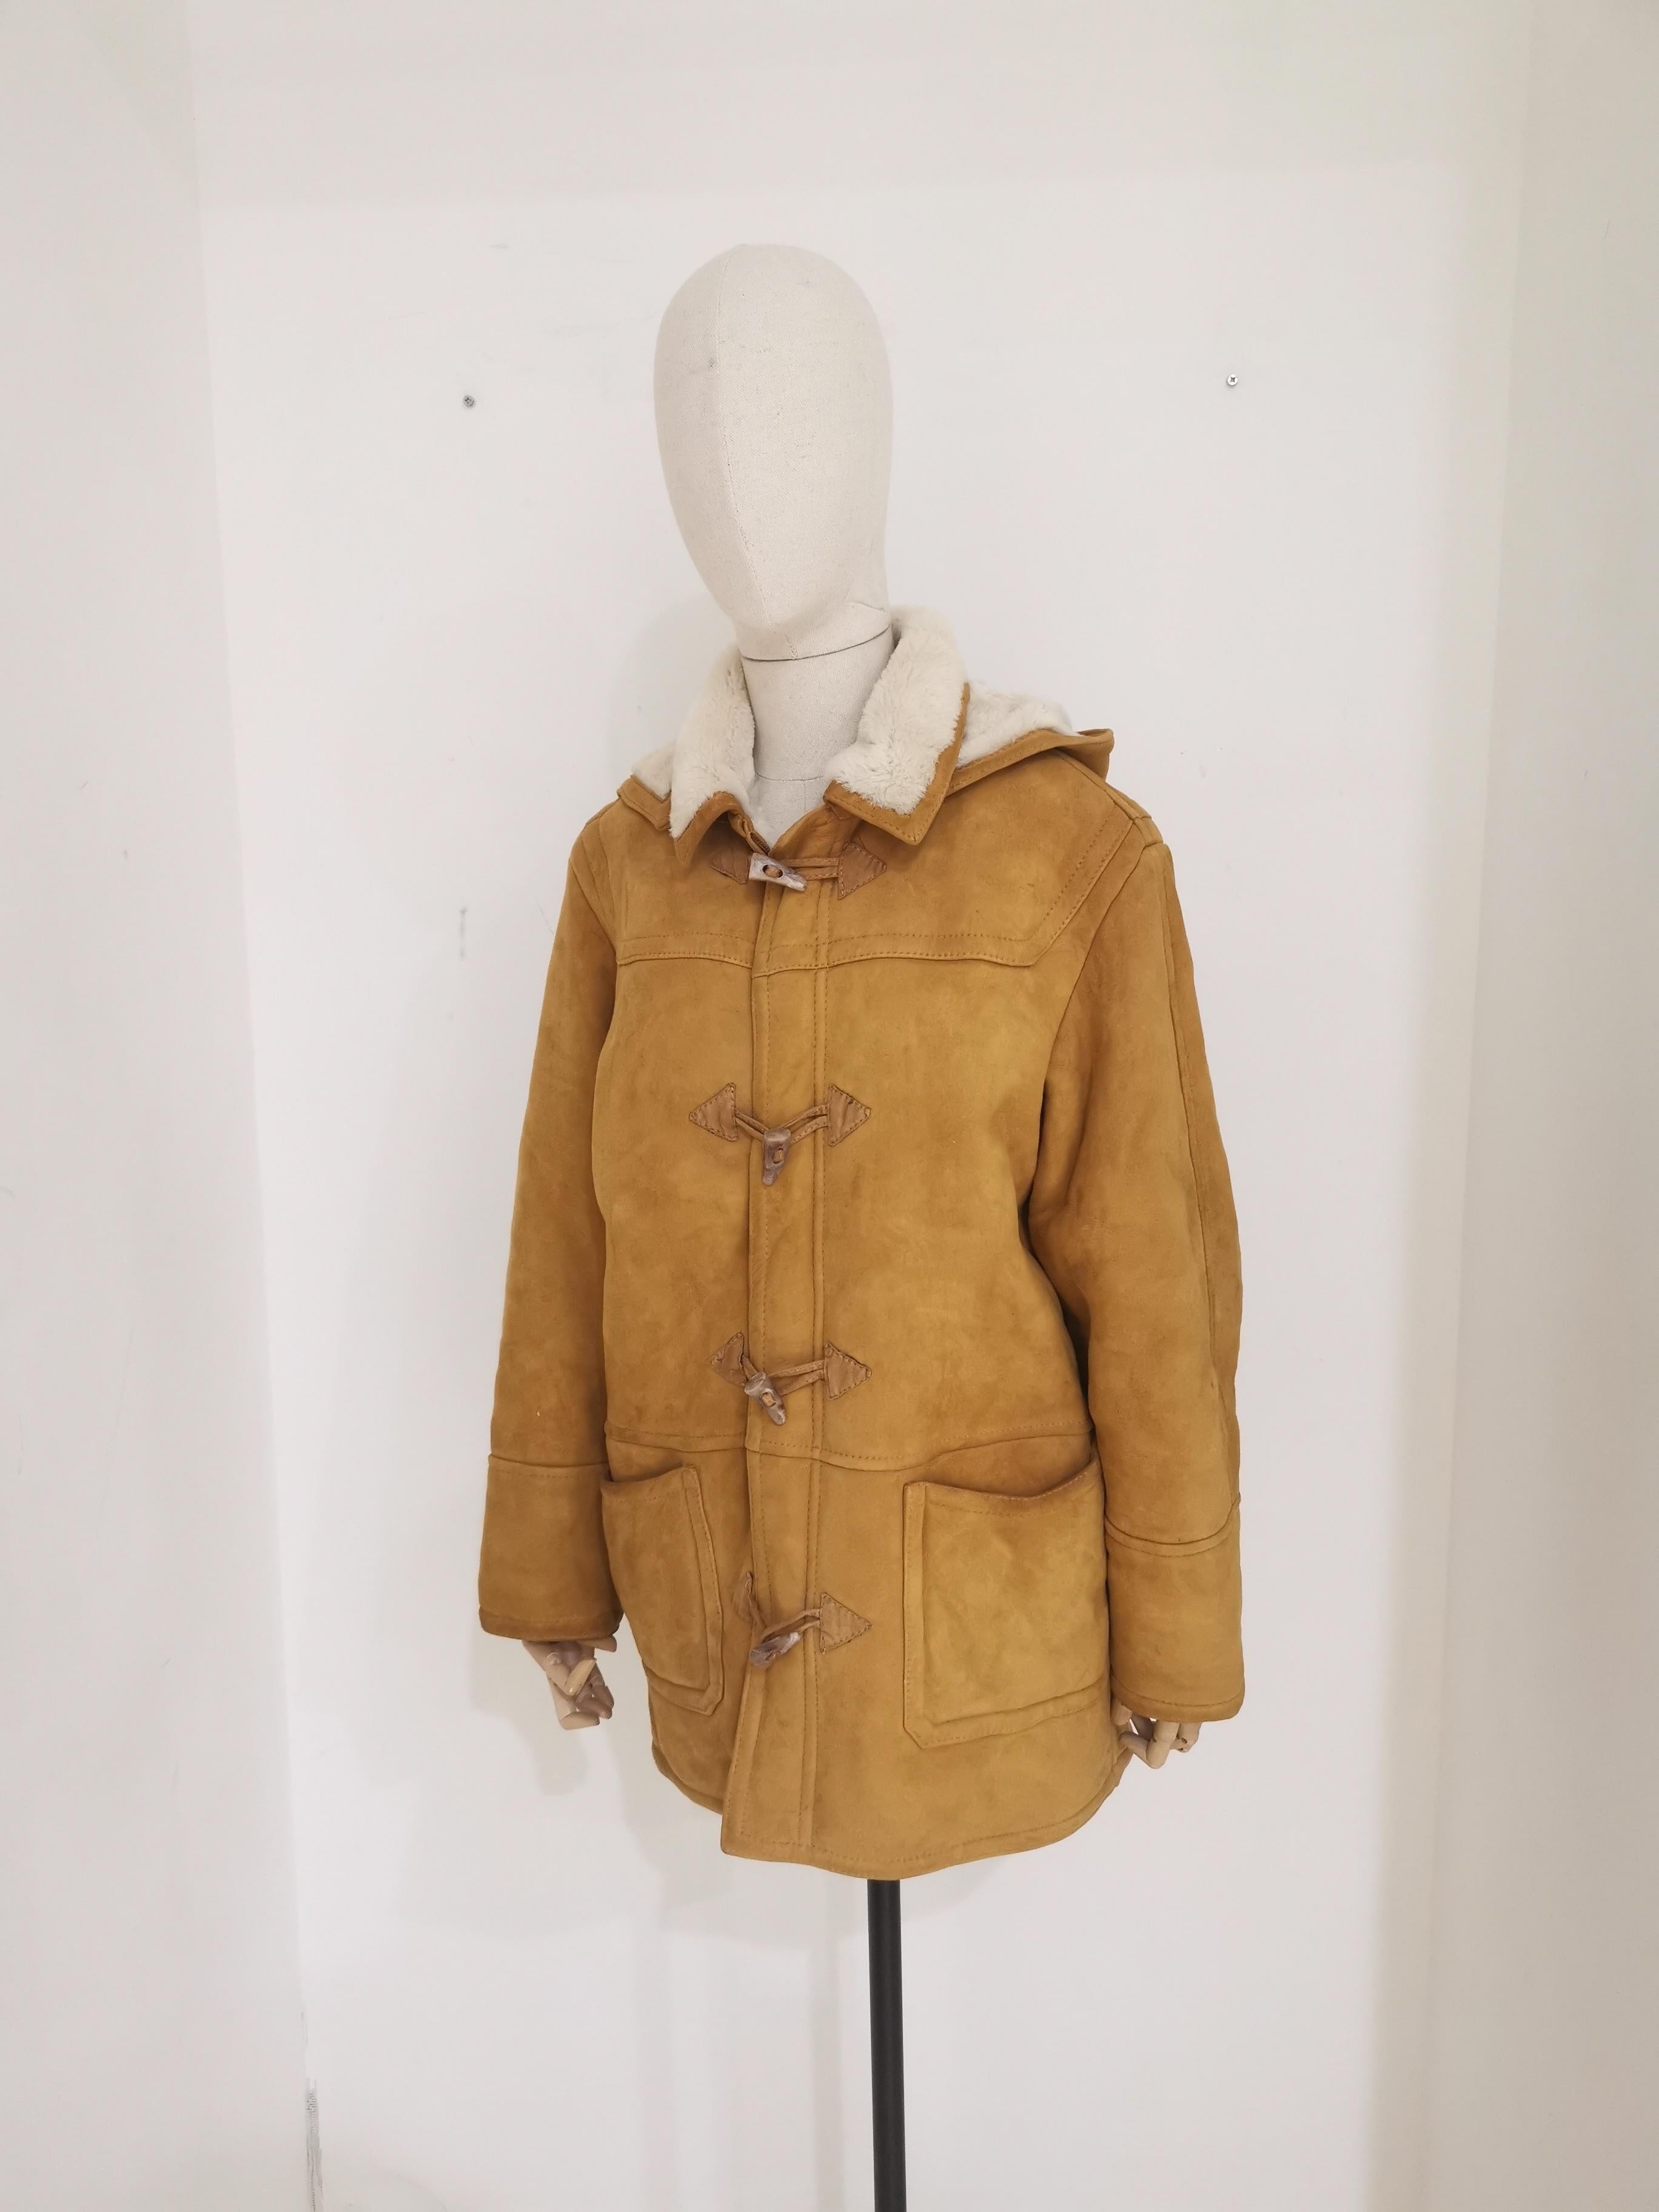 Vintage beige suede wool bomber jacket
totally made in italy